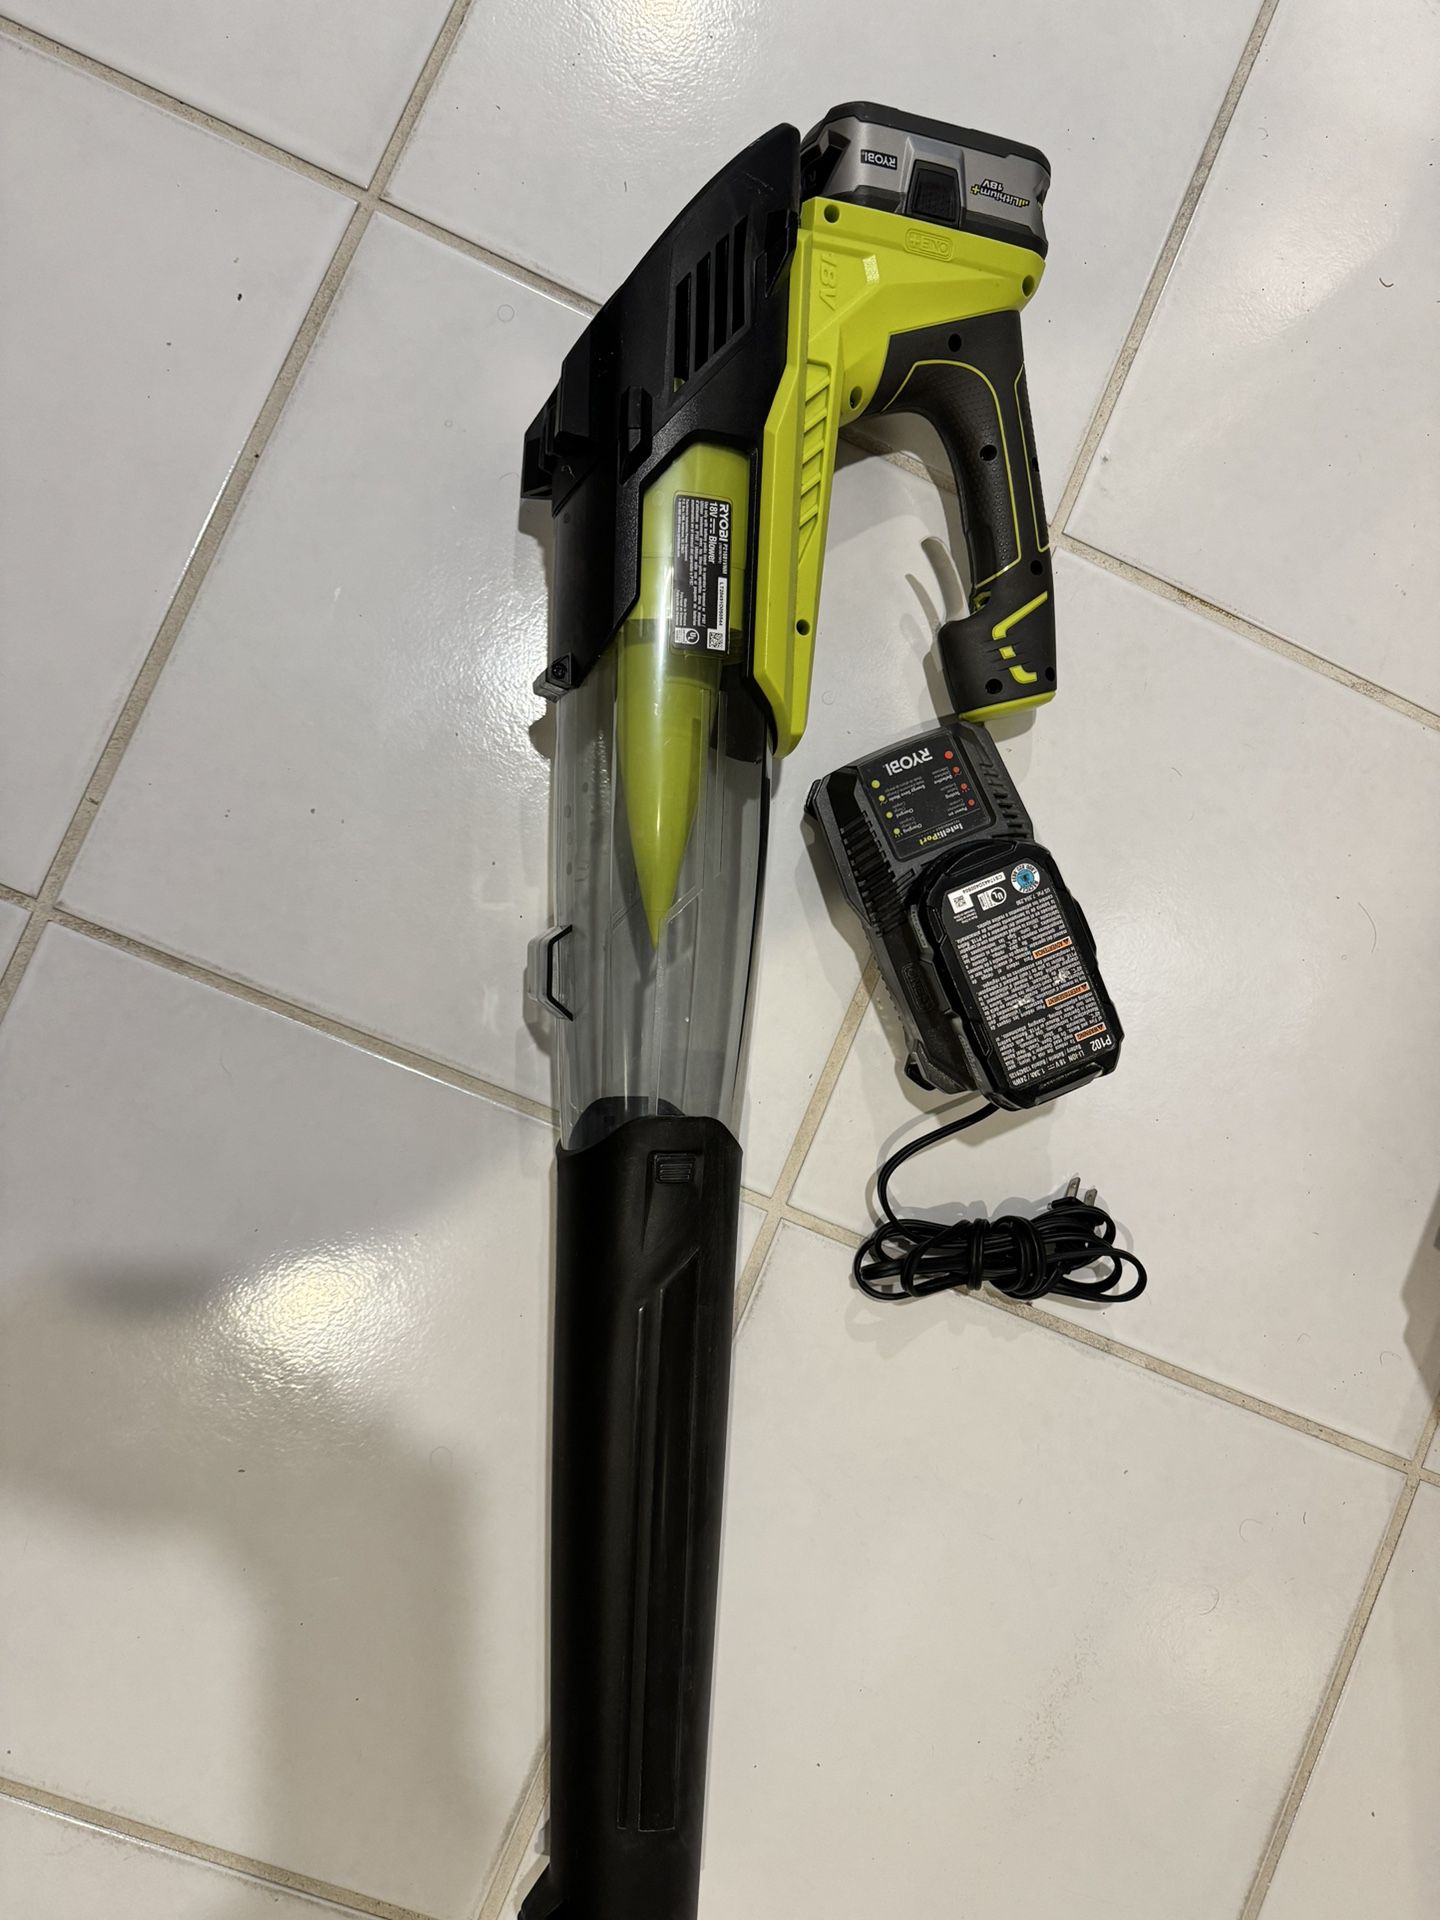 Ryobi 18 Volt Leaf Blower With Charger